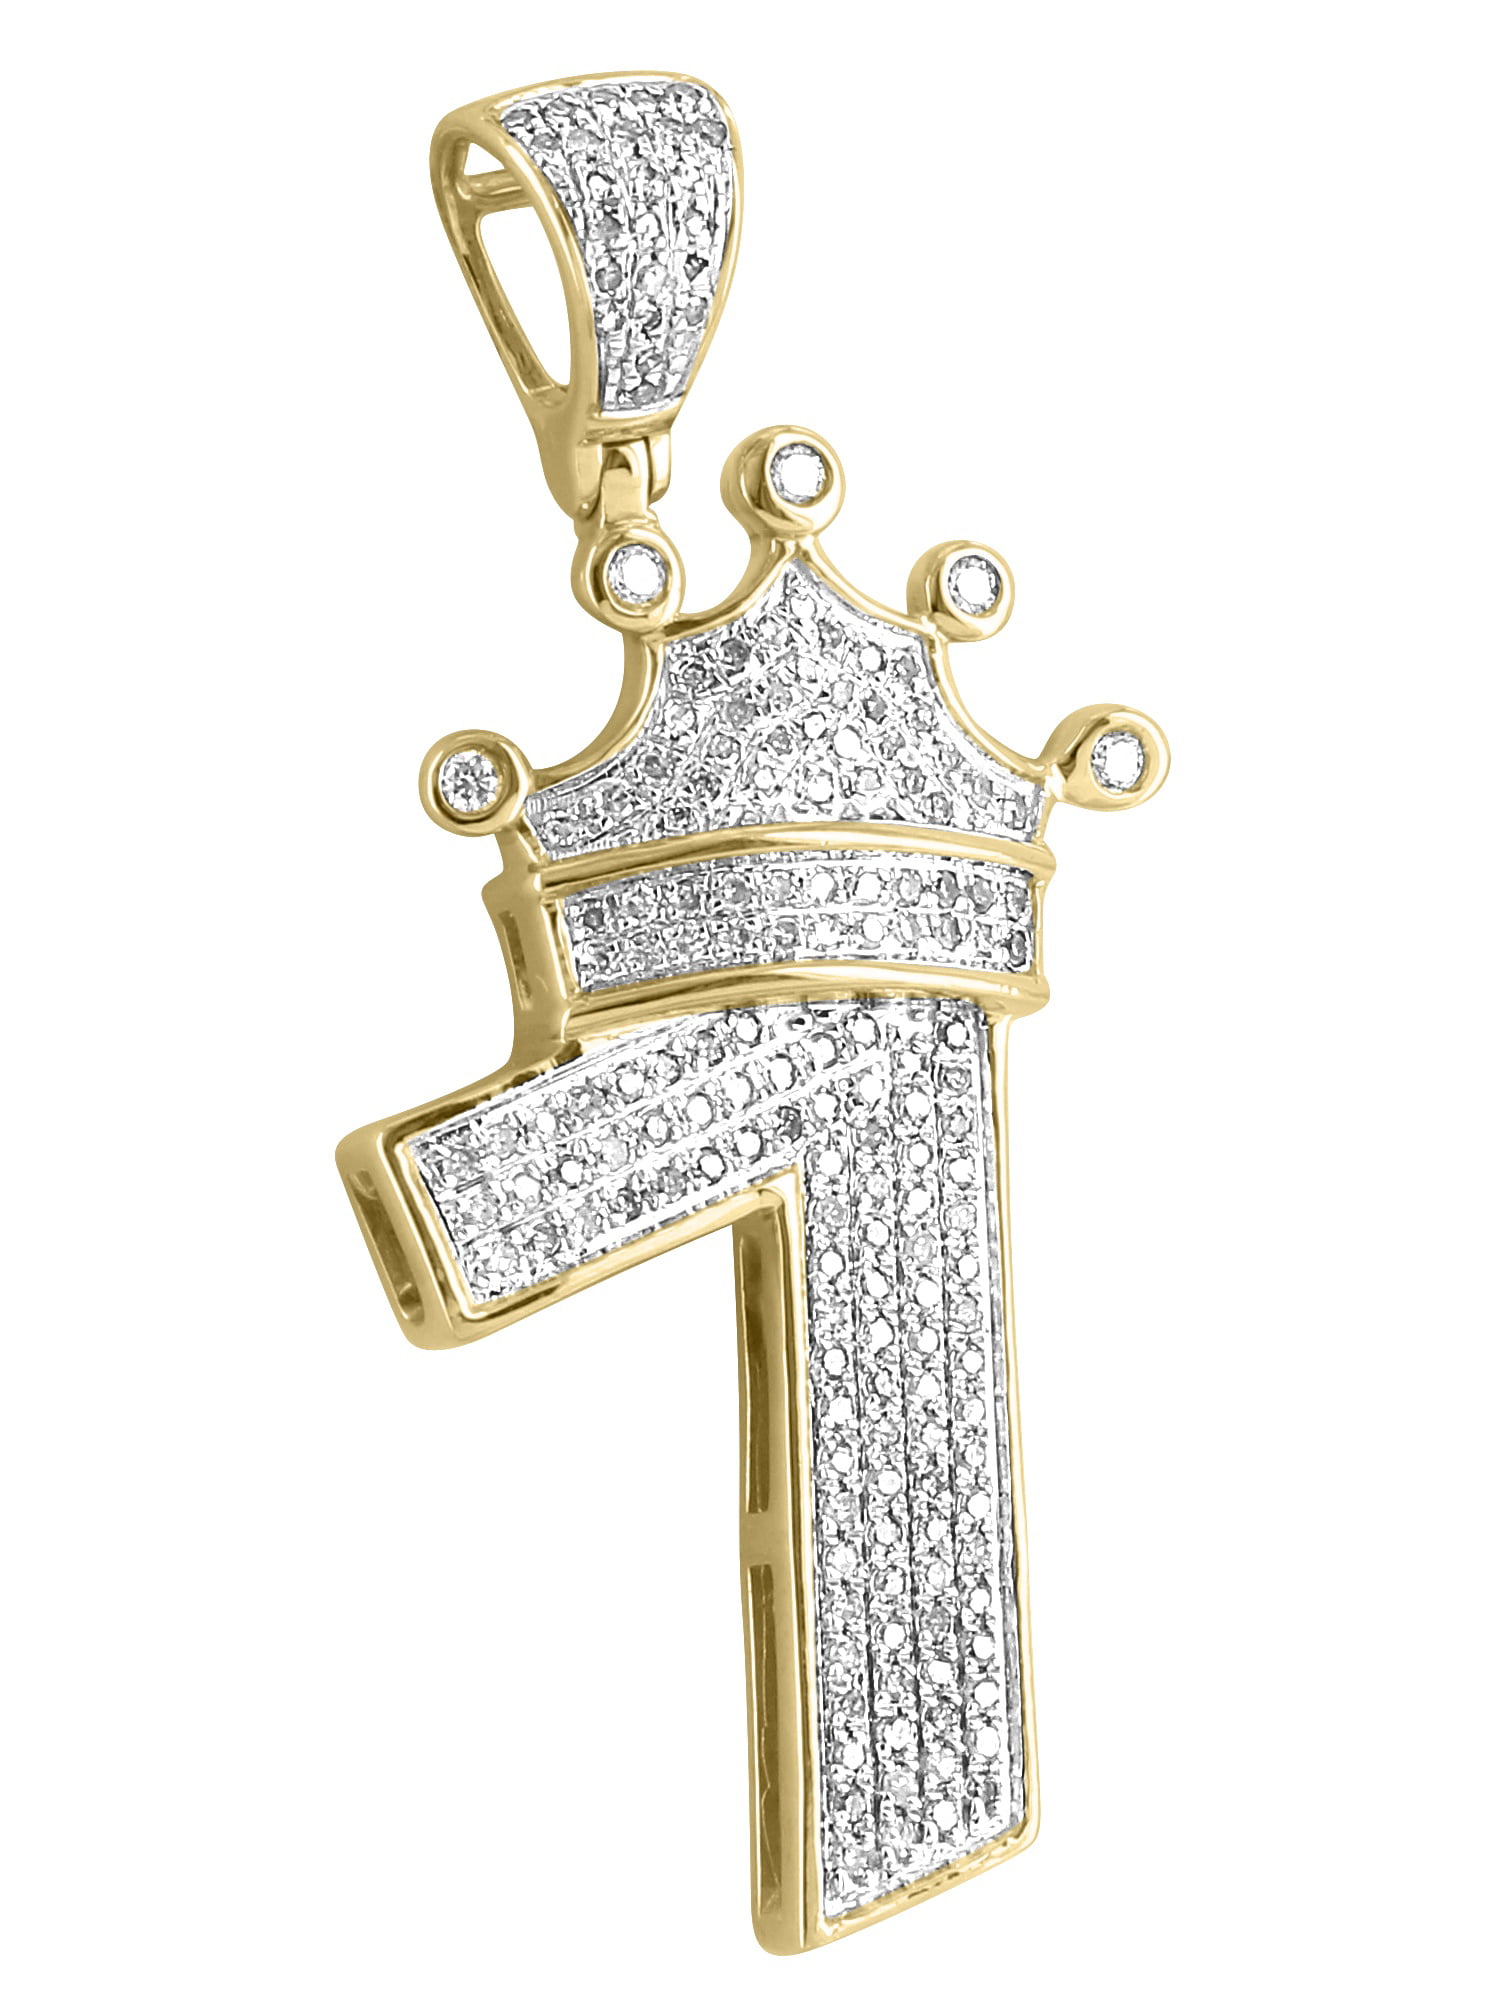 Lucky Number 7 Pendant King Crown 10k Yellow Gold 0.69 Carat Real ...